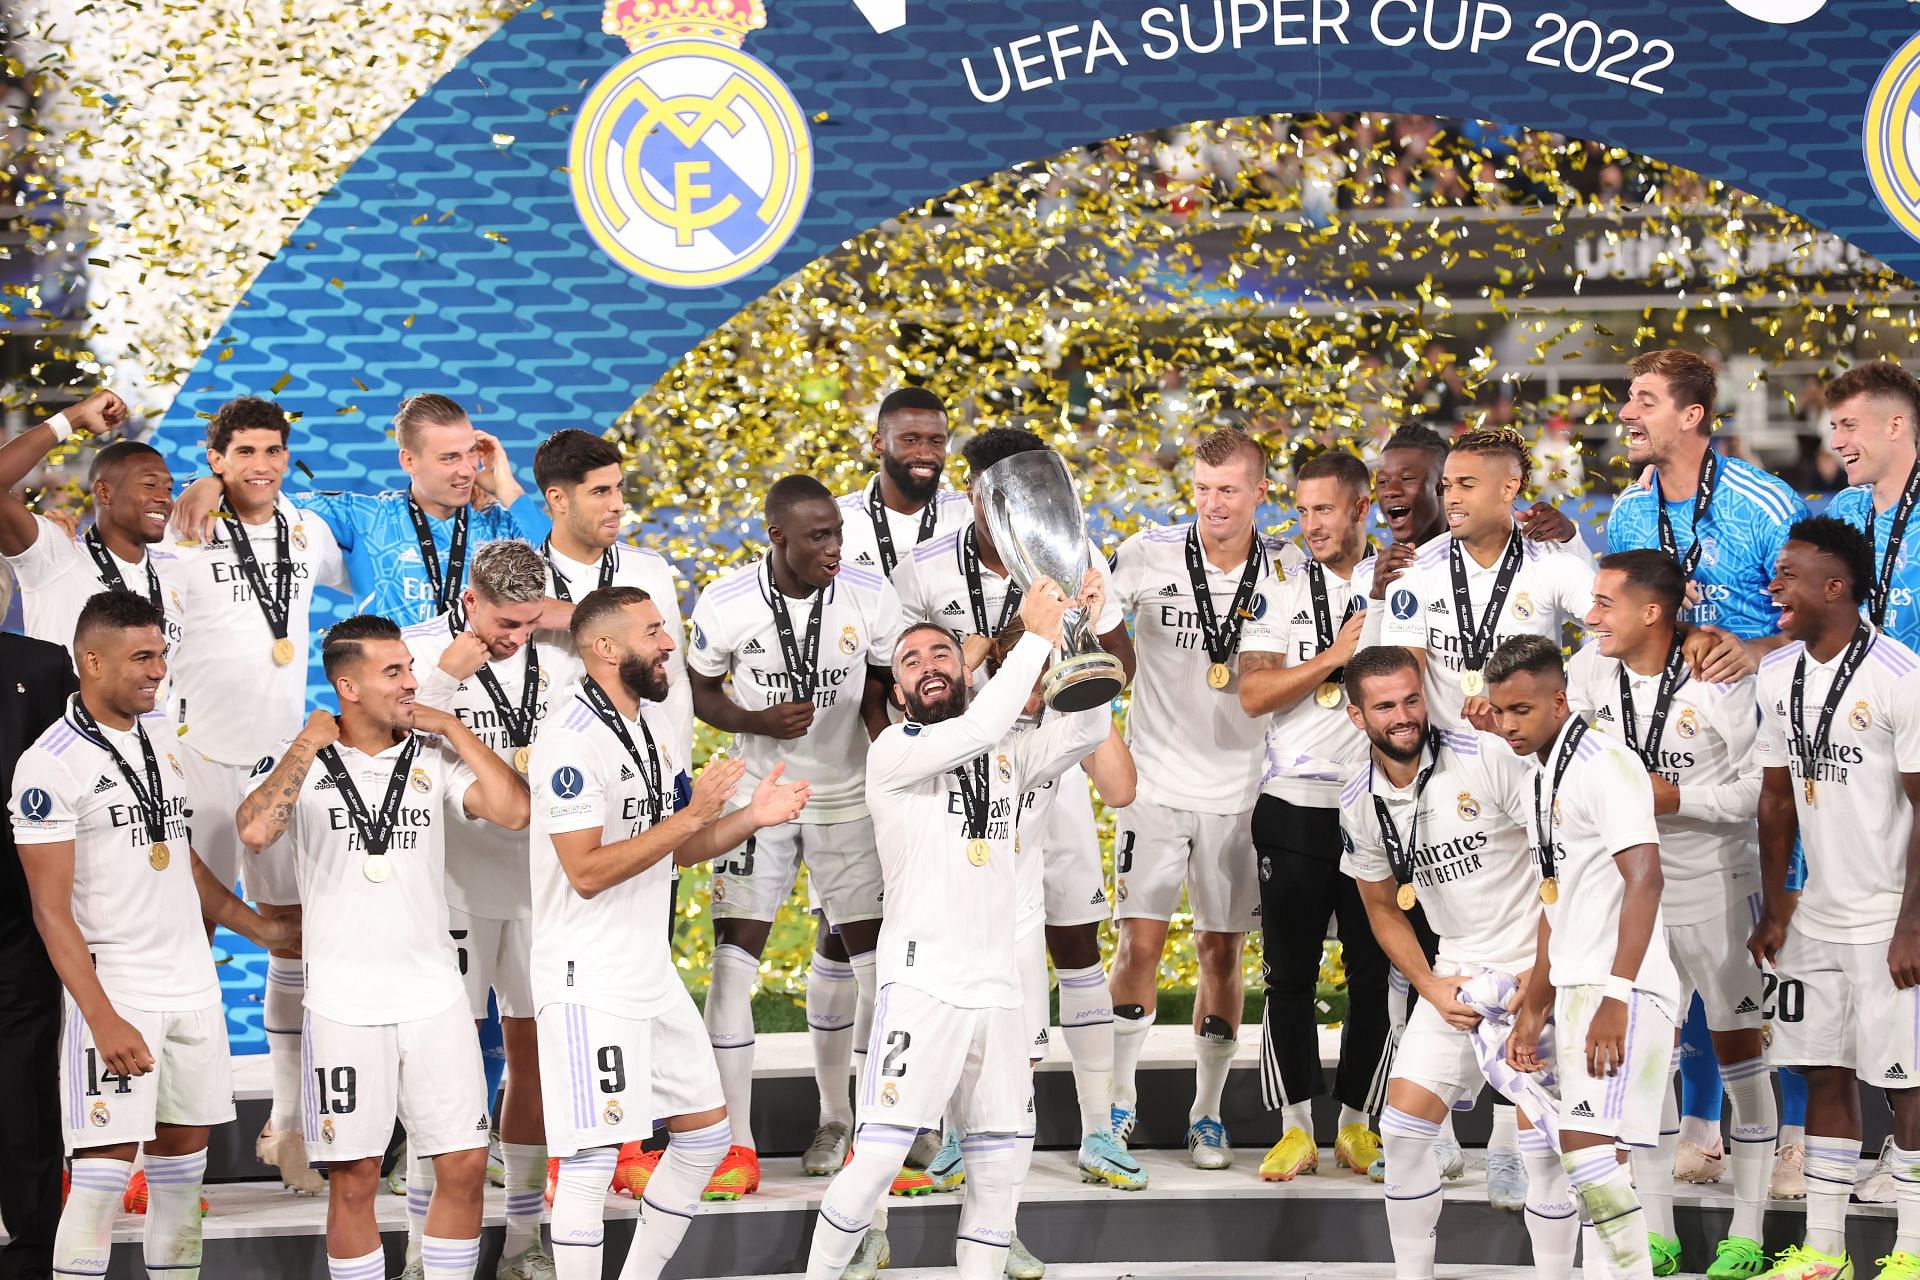 Real Madrid add another piece of silverware to the collection